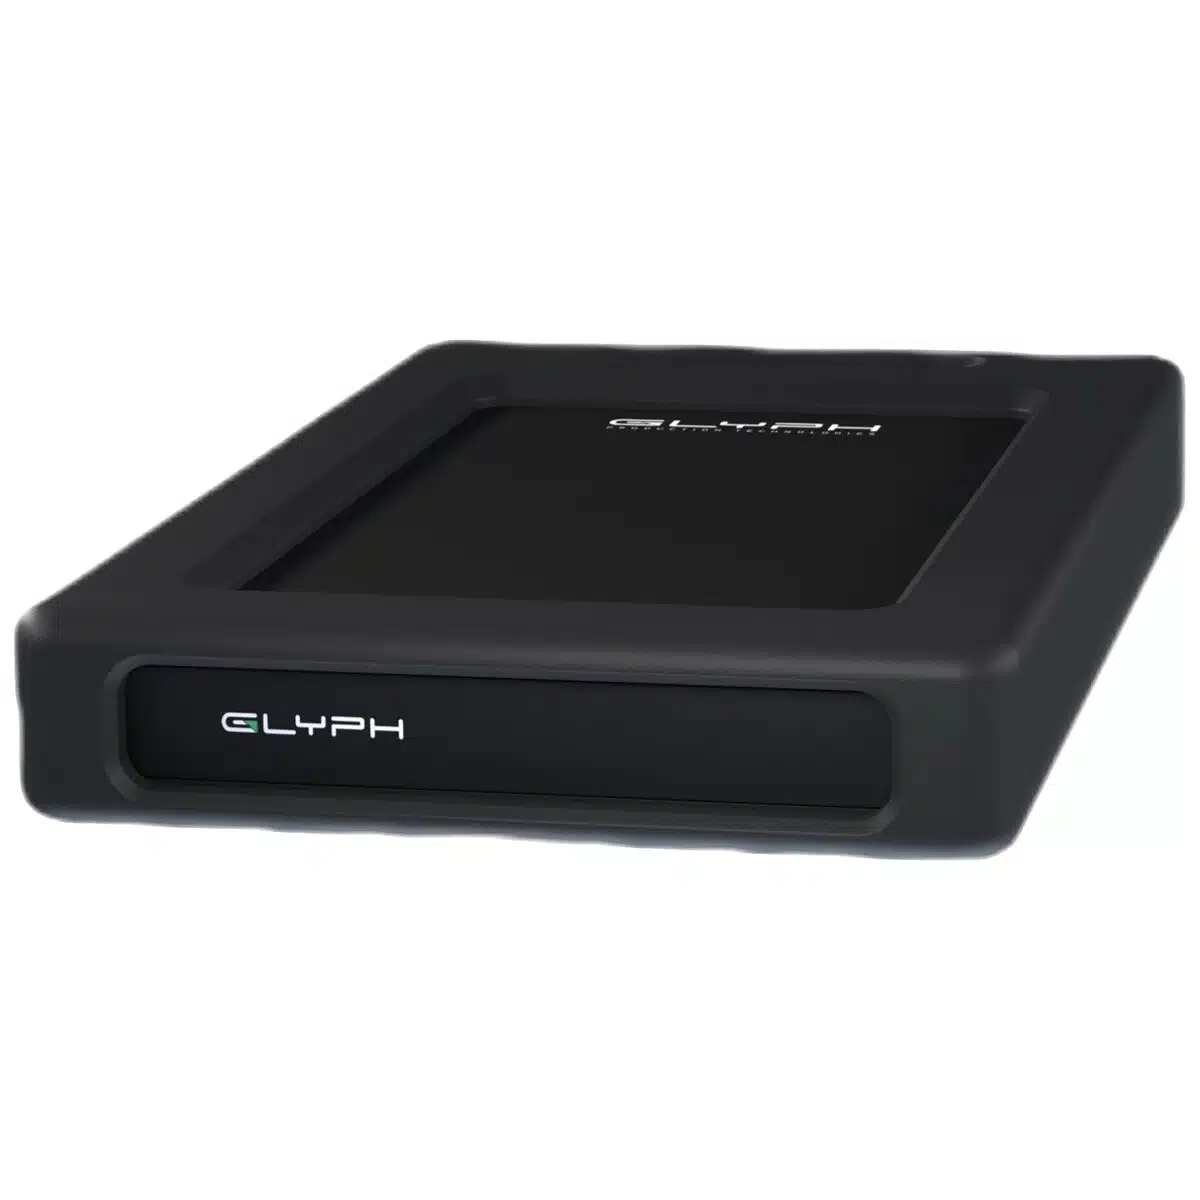 Glyph SecureDrive+ Encrypted SSD Drive with Bluetooth